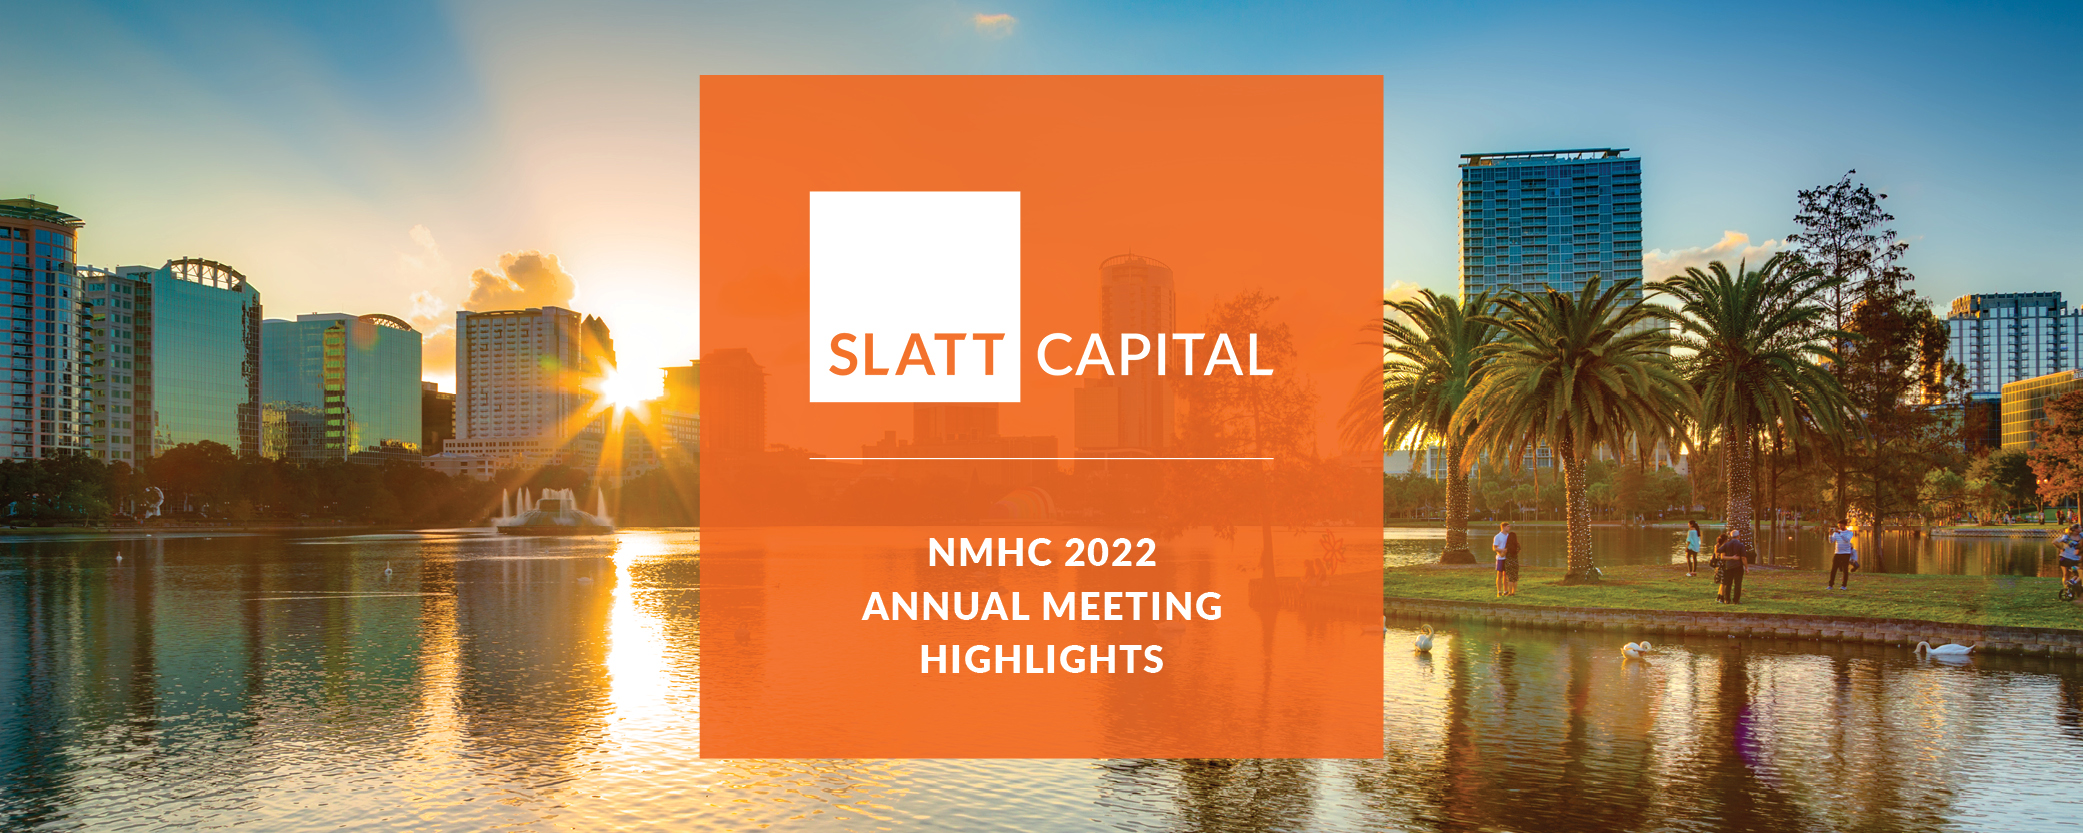 Nmhc 2022 annual meeting highlights